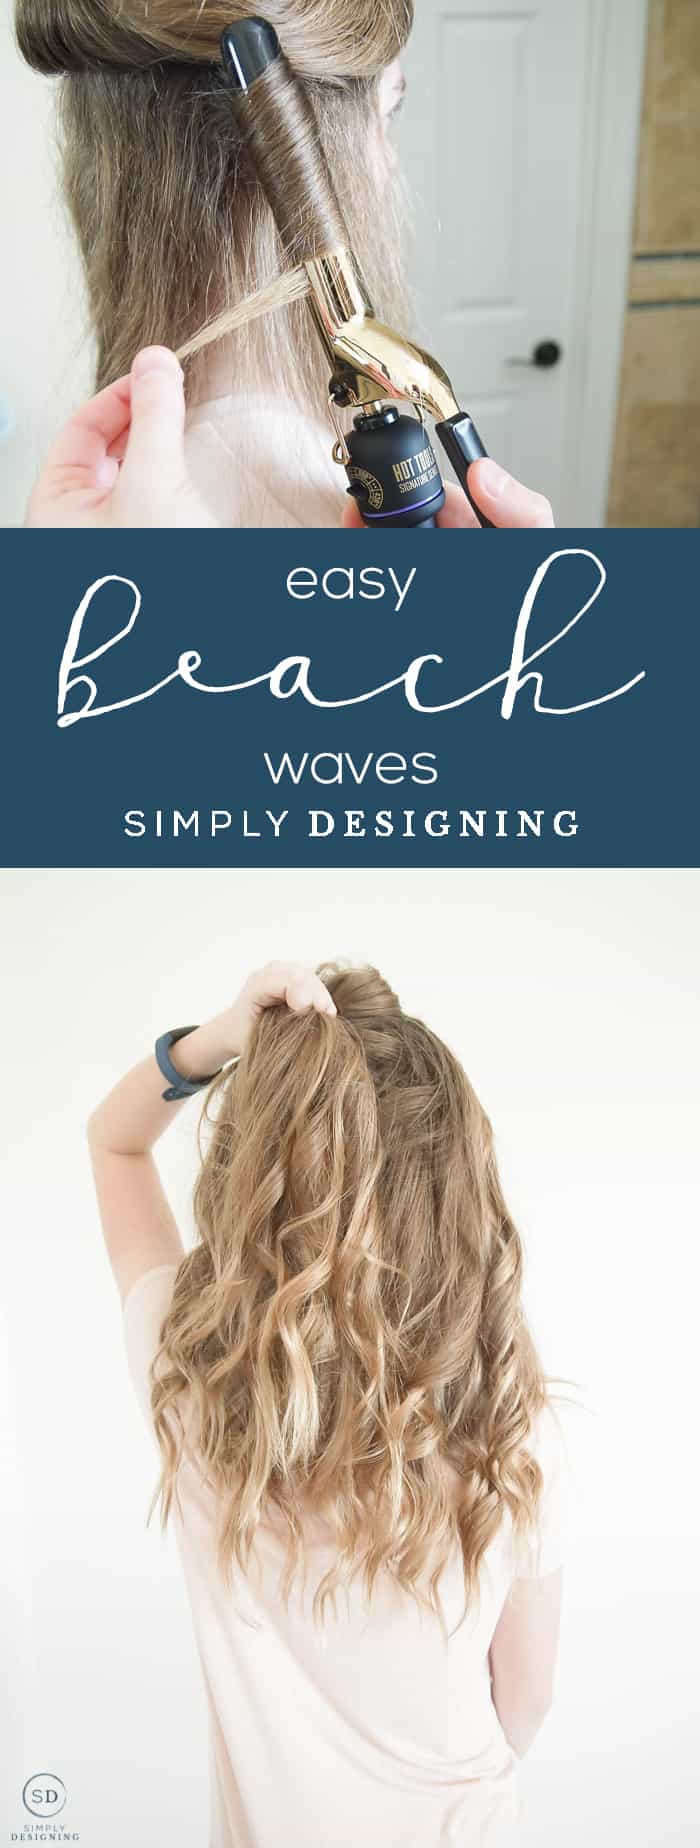 Easy Beach Waves for Long Hair - I am sharing how to create easy beach waves for long or short hair in only a few minutes